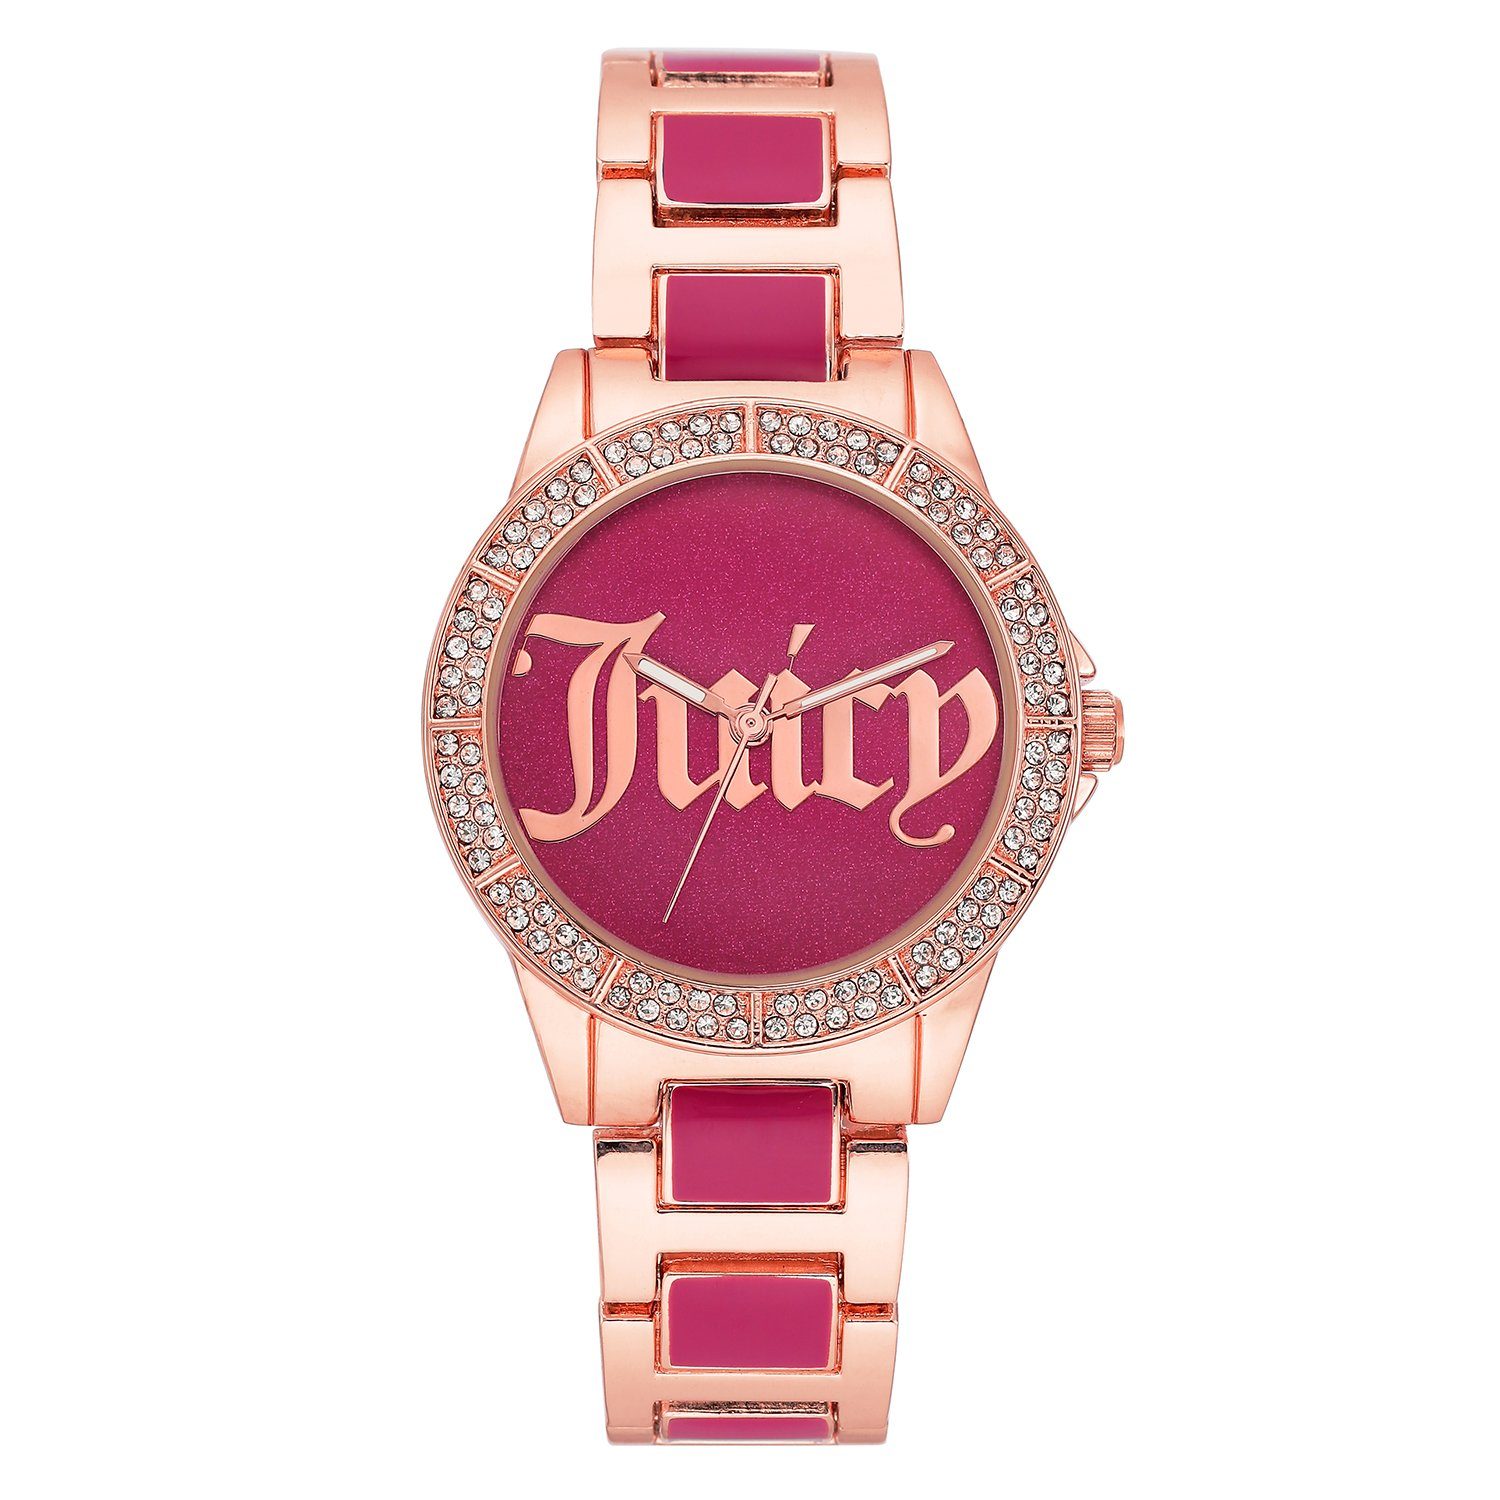 Juicy Couture Digitaluhr JC/1308HPRG